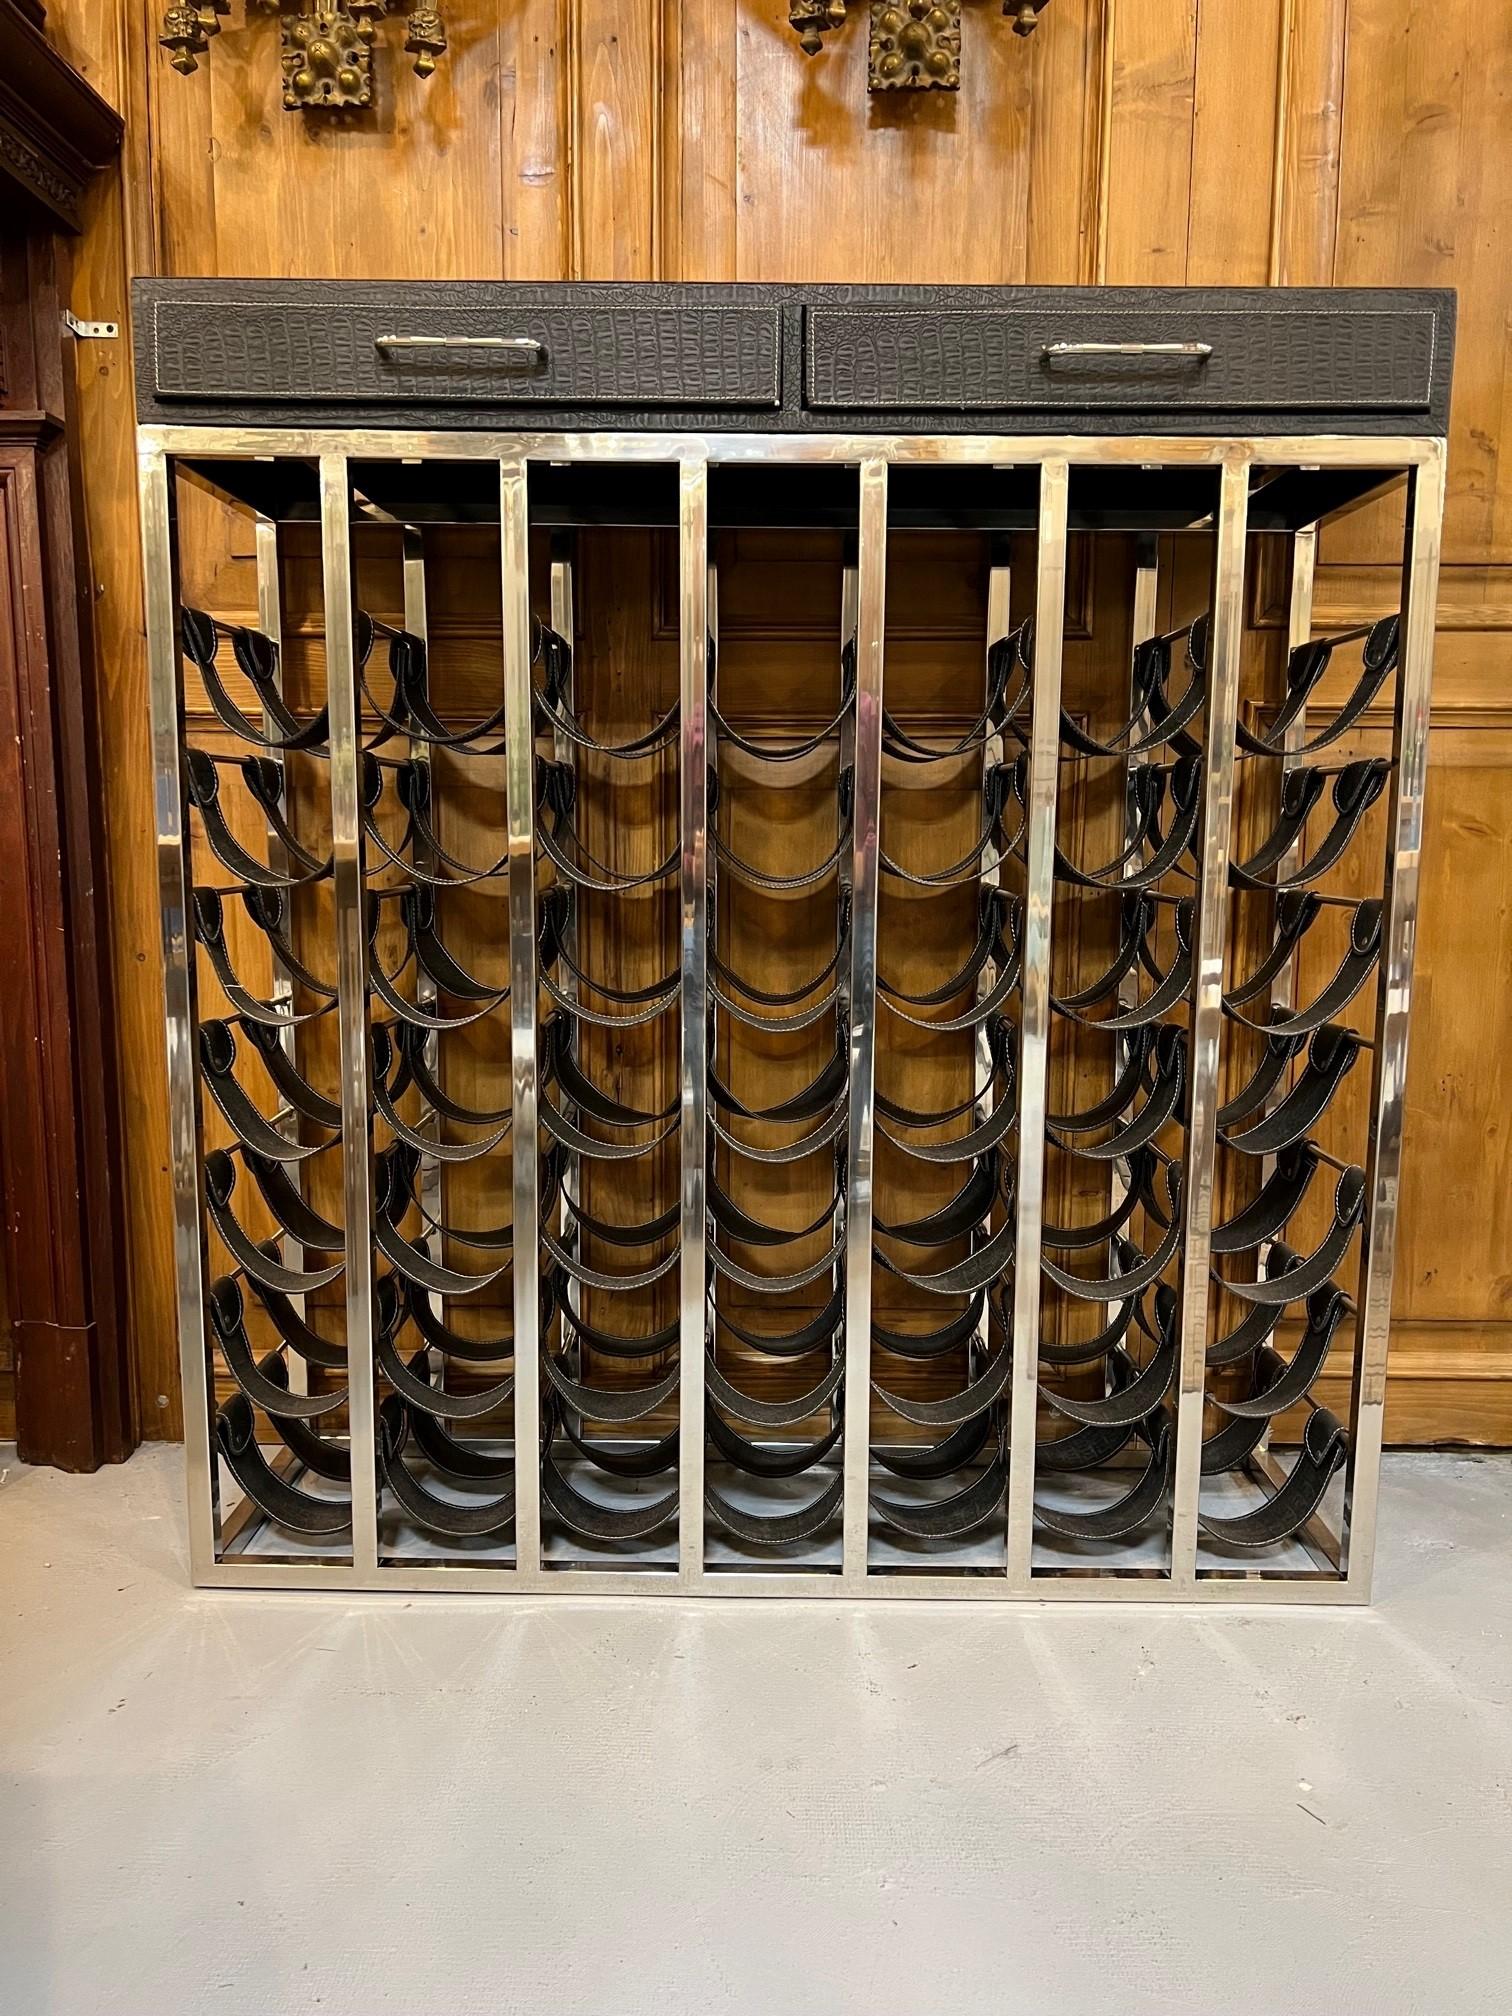 Exceptional 49 bottle nickel plated wine rack console with saddle leather holders and a leather top with two drawers. The bottle space is a good size 5.50 x 13.50 which can hold larger bottles. This is a new wine rack imported from India around 2015